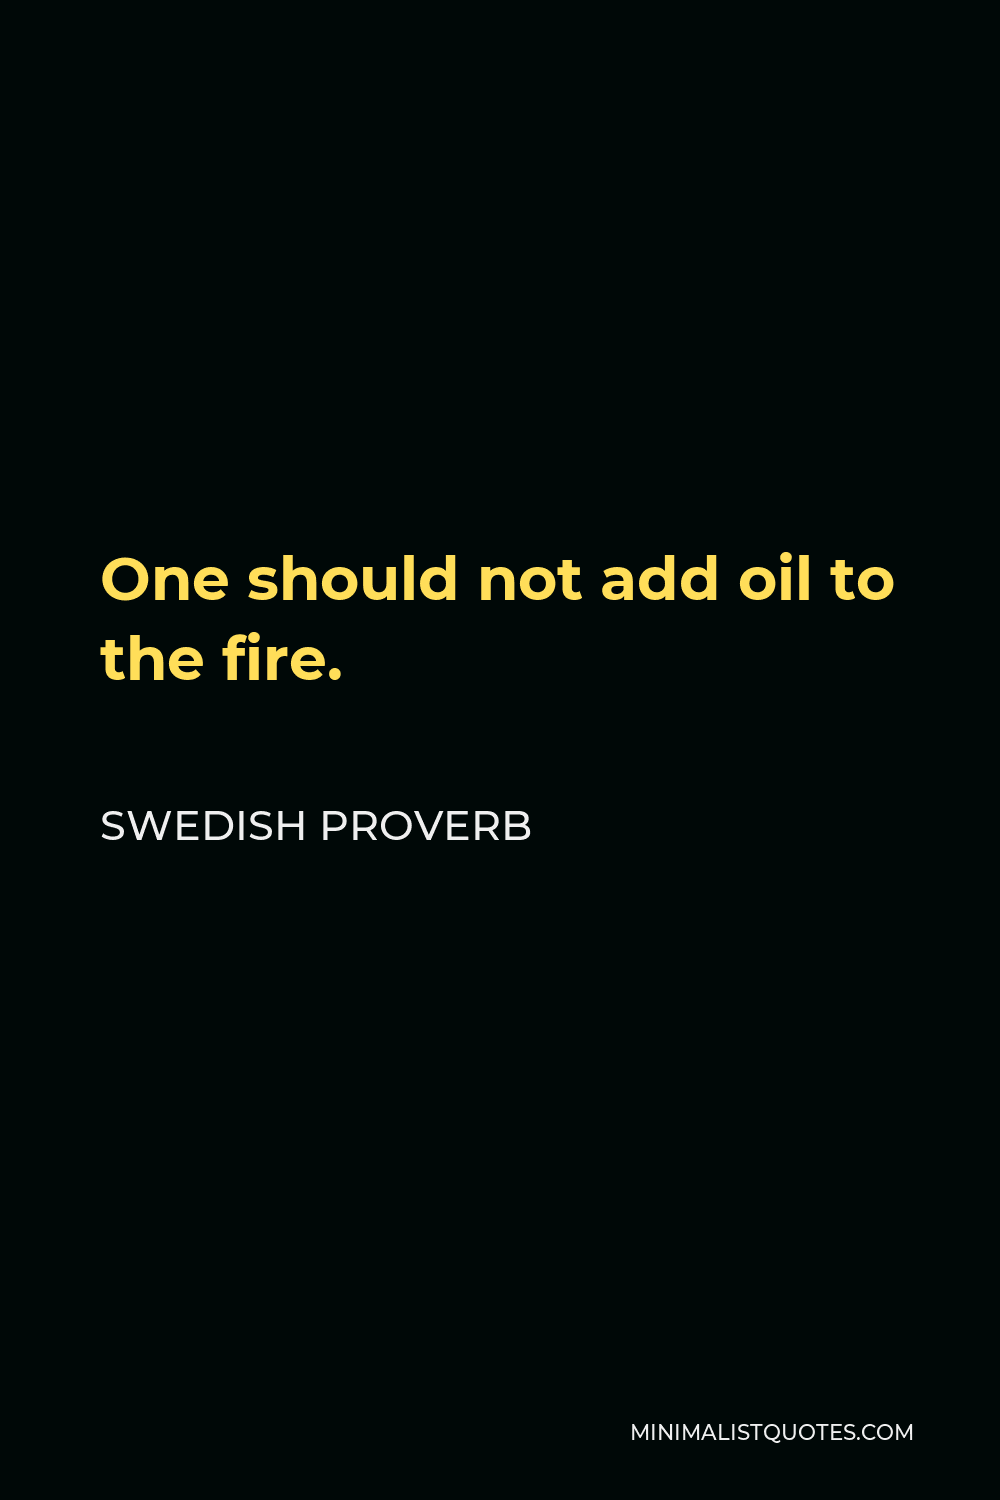 Swedish Proverb Quote - One should not add oil to the fire.